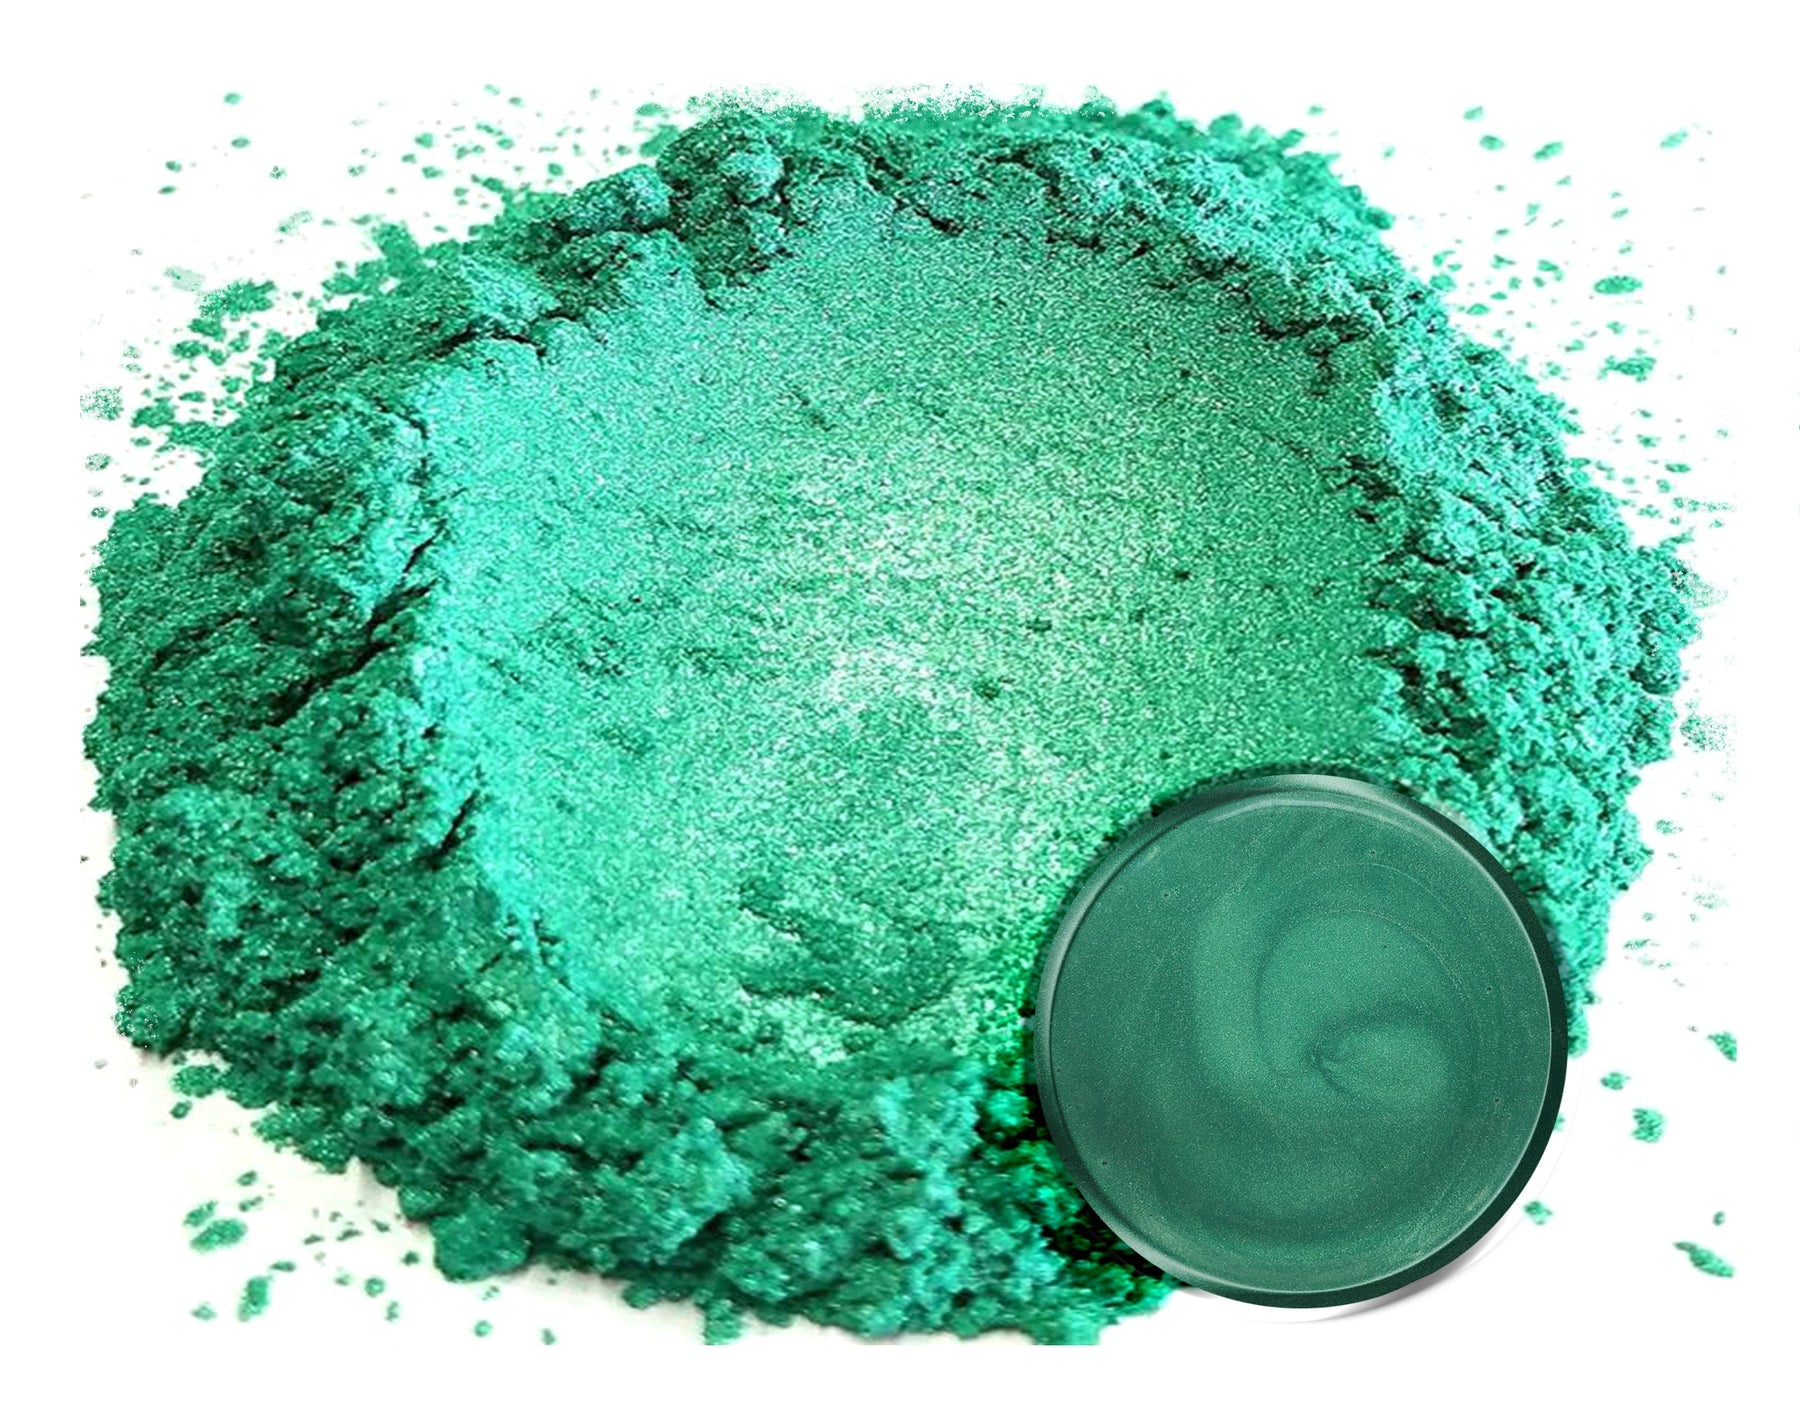 Powdered pigment by eye candy pigments for epoxy resin projects. In the color Forest Green.